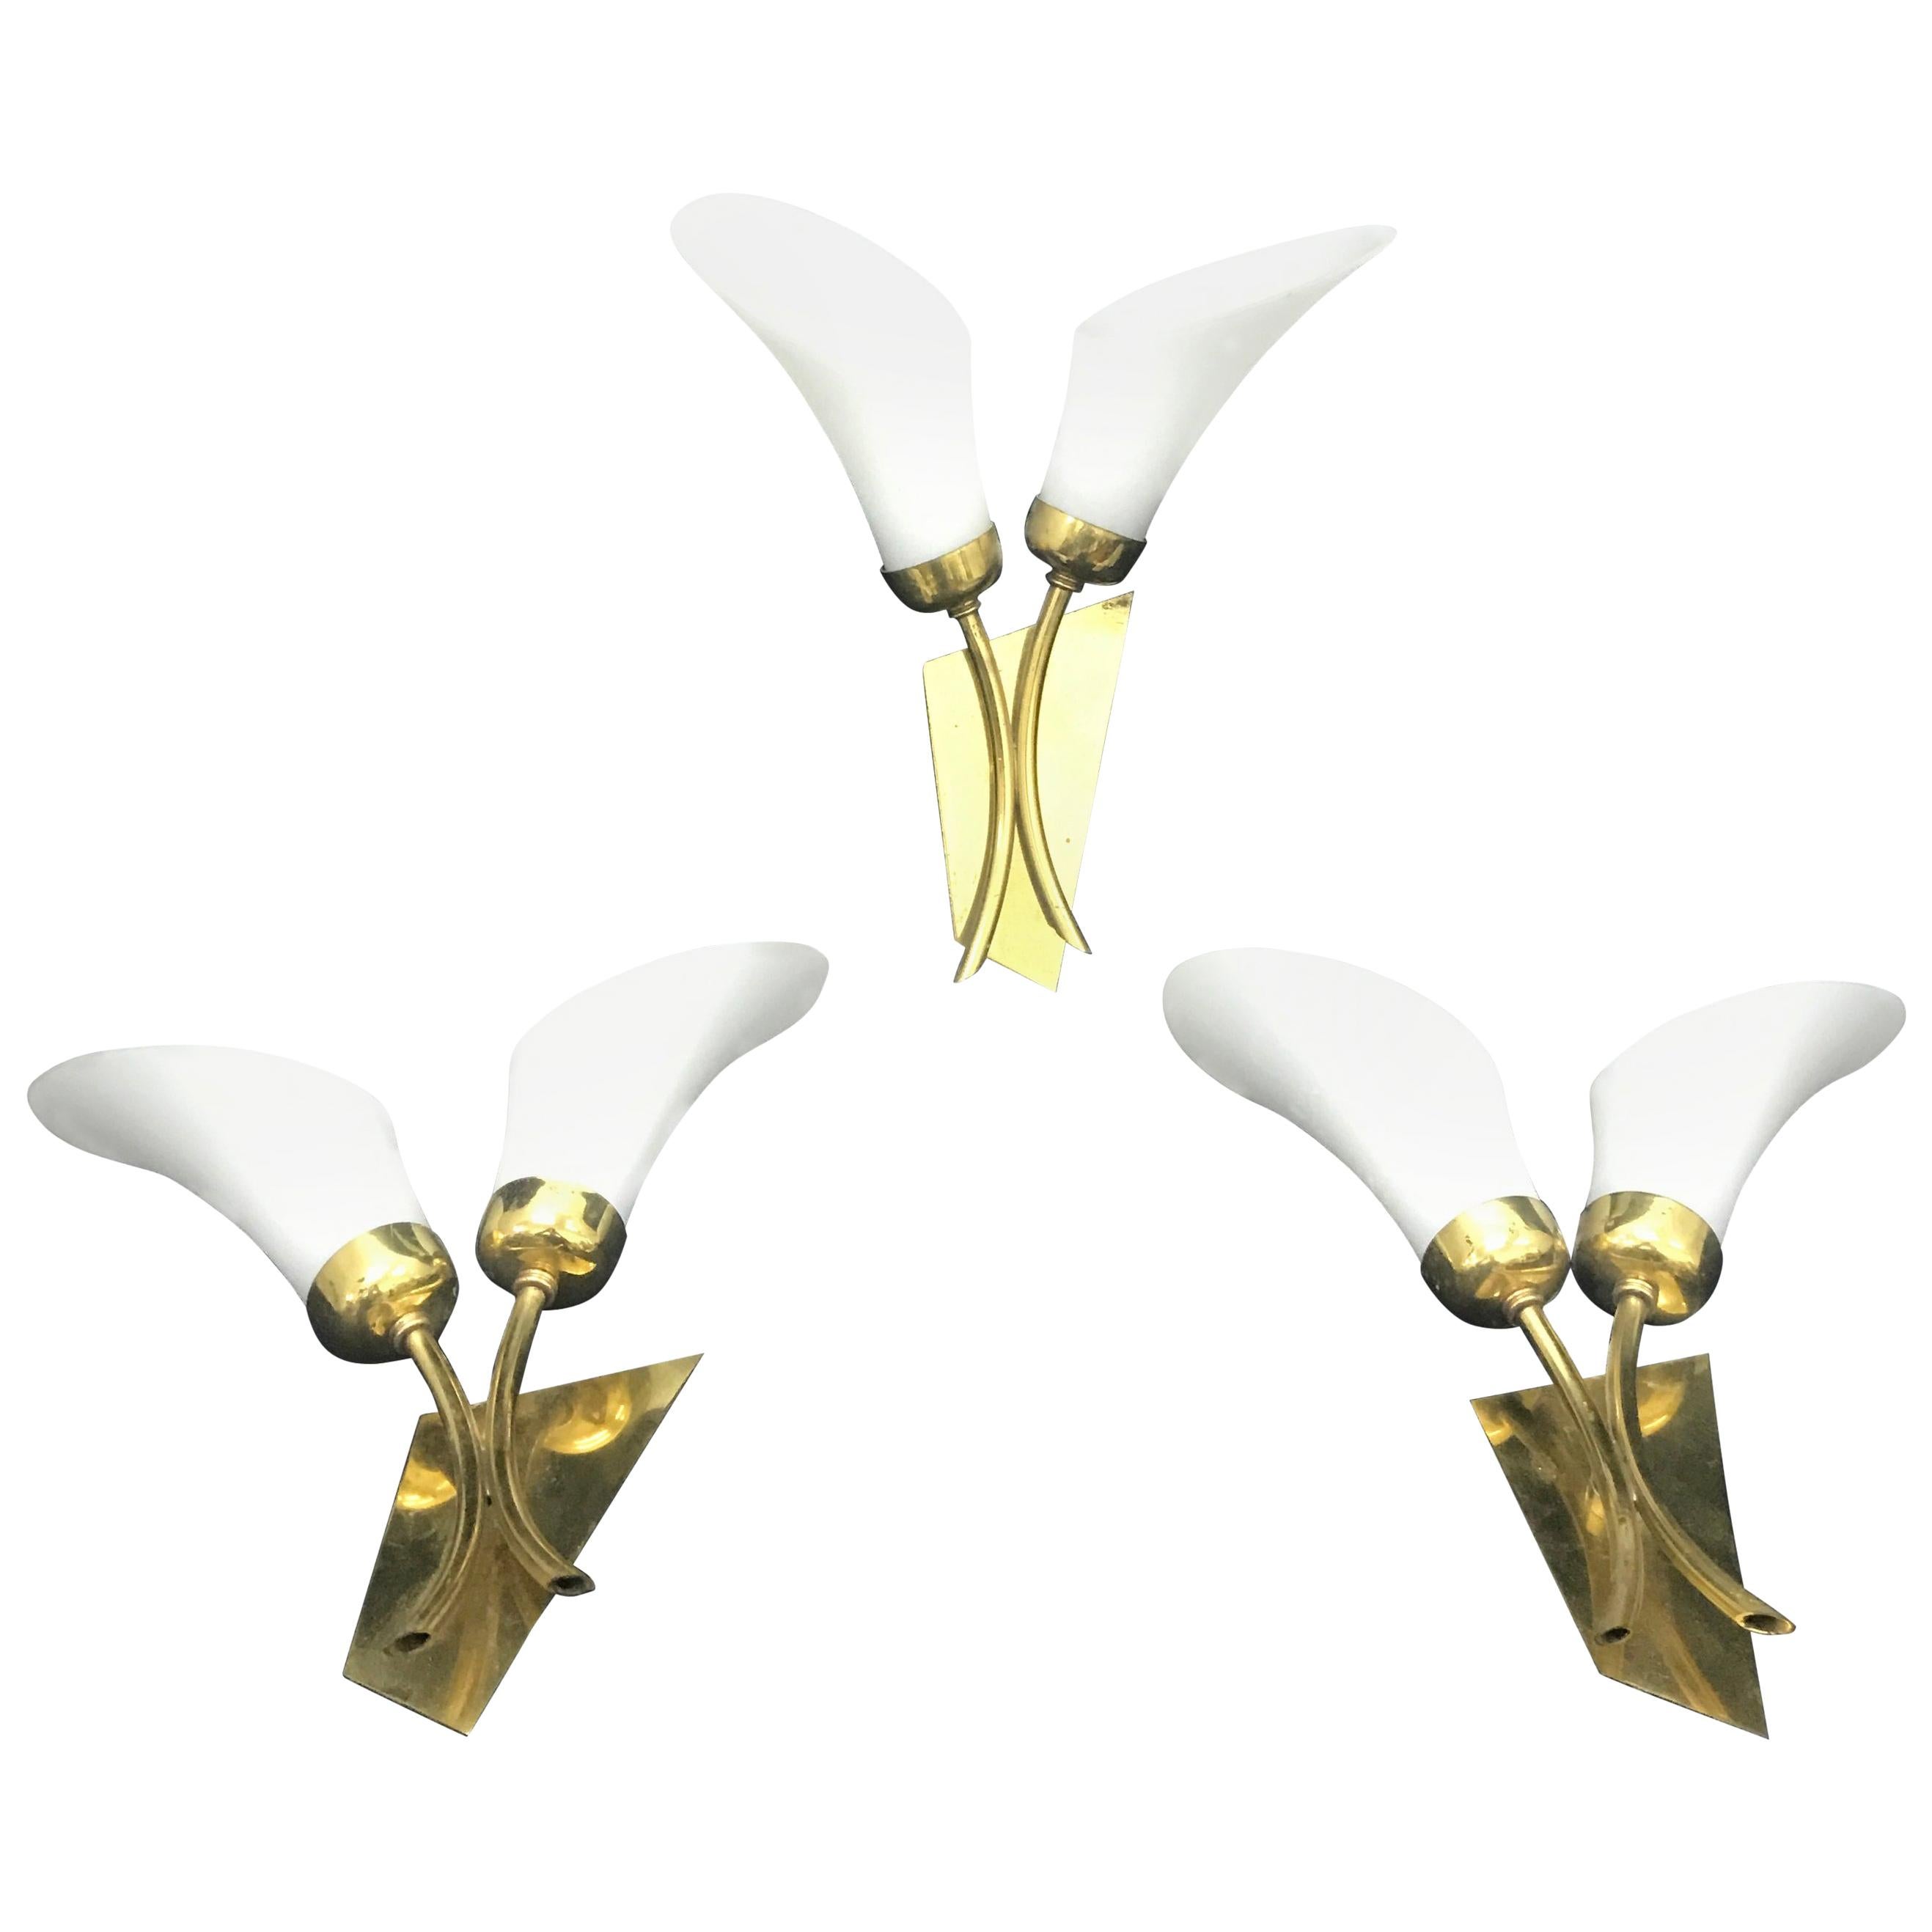 Three Mid-Century Modern Brass and White Glass Wall Sconces, Italy, 1950